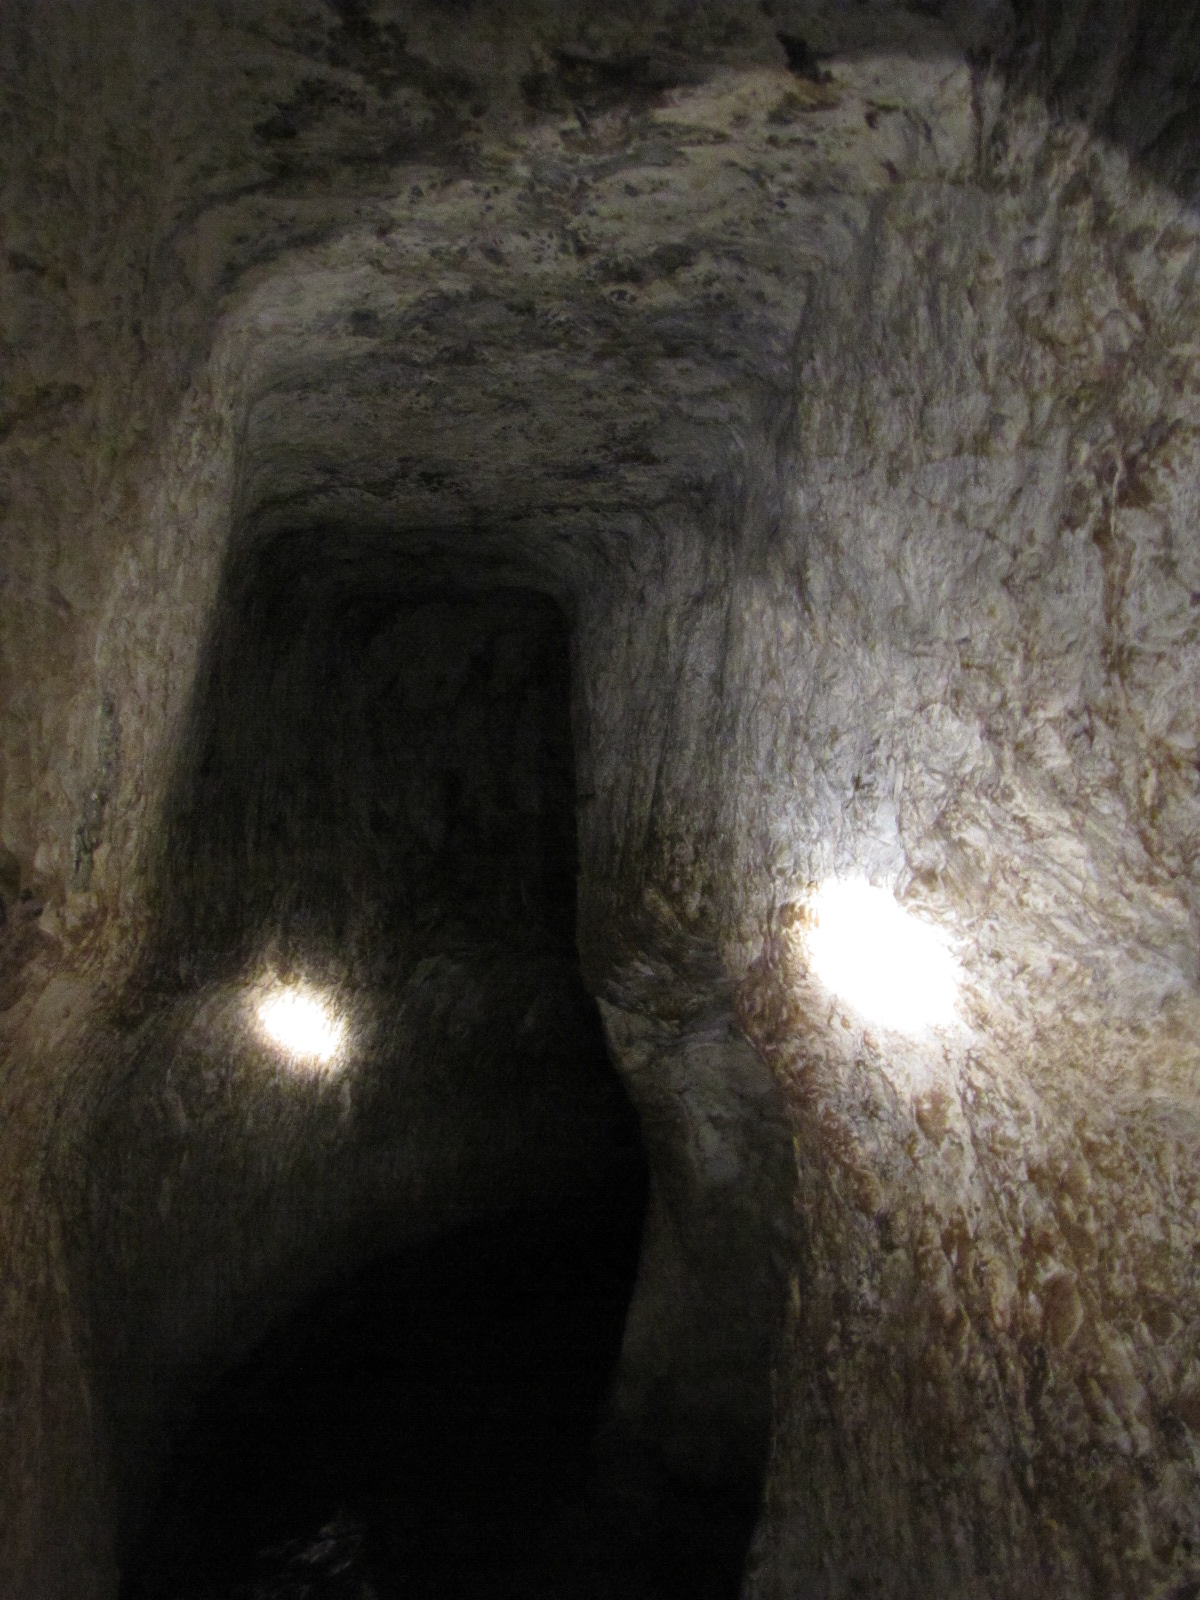 The tunnel connecting the Gihon Springs to the beginning of Hezekiah's Tunnel